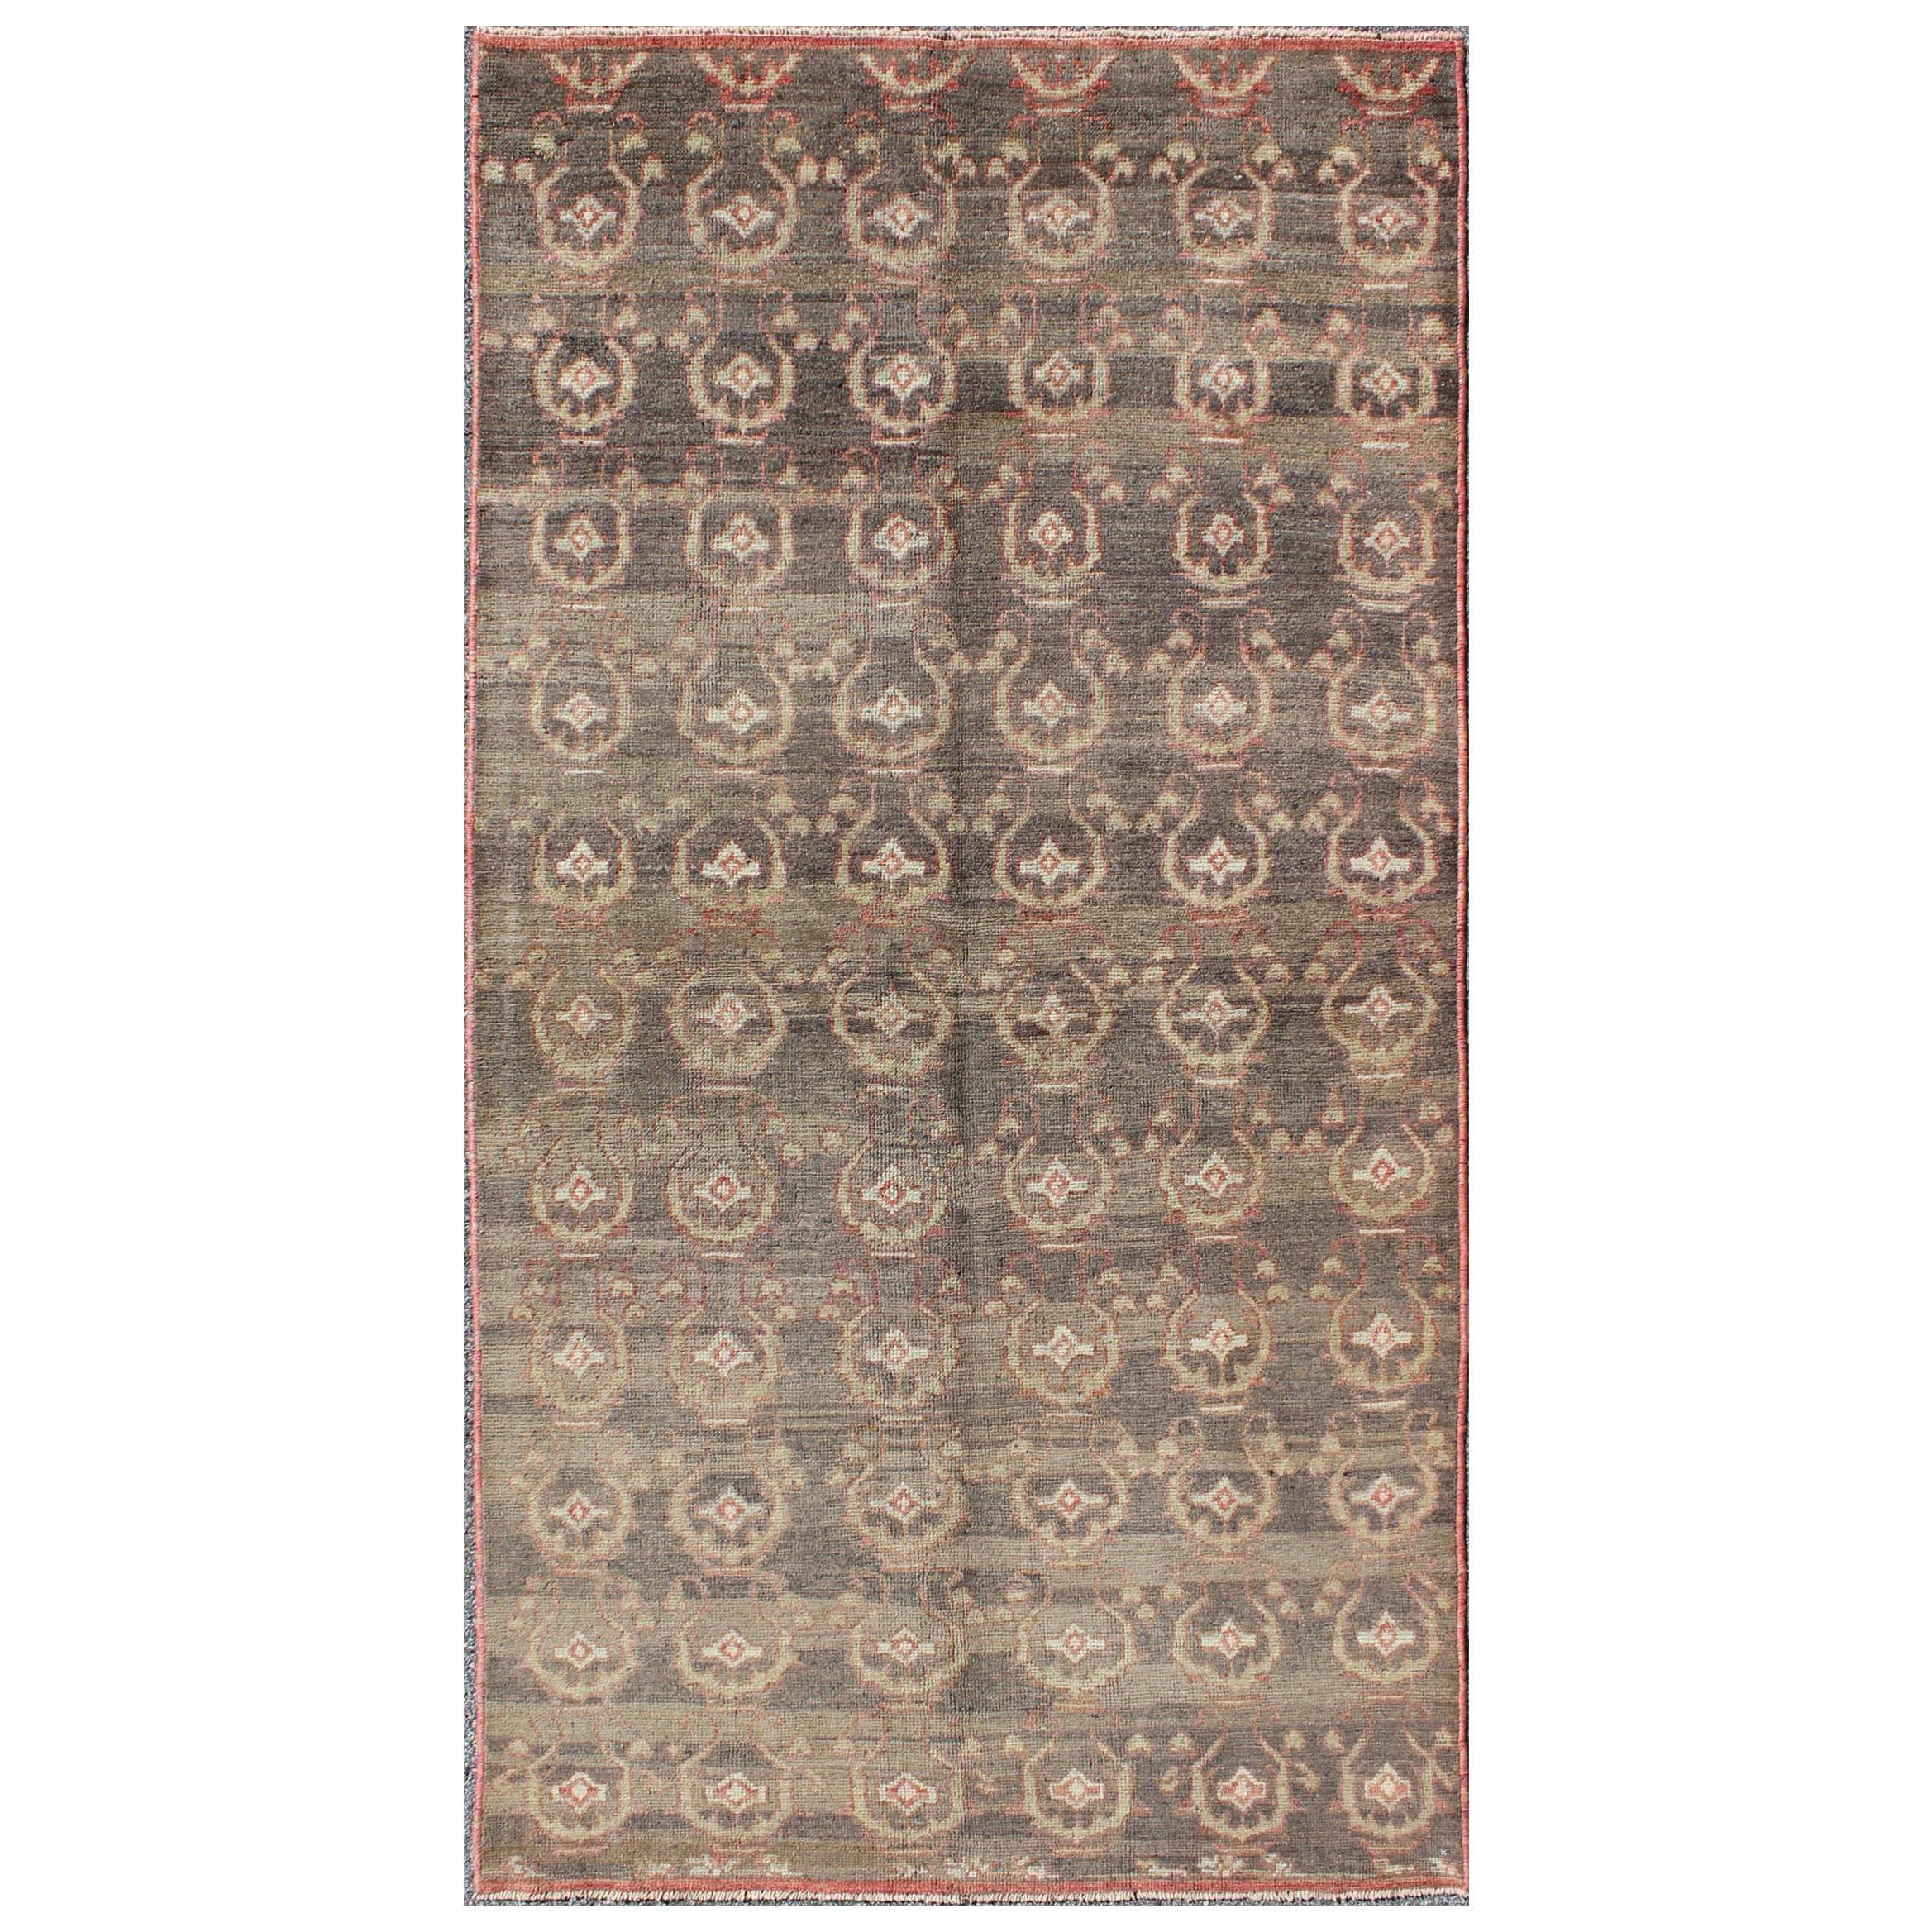 Gray Background Vintage Turkish Oushak Rug with All-Over Design in Red and Green